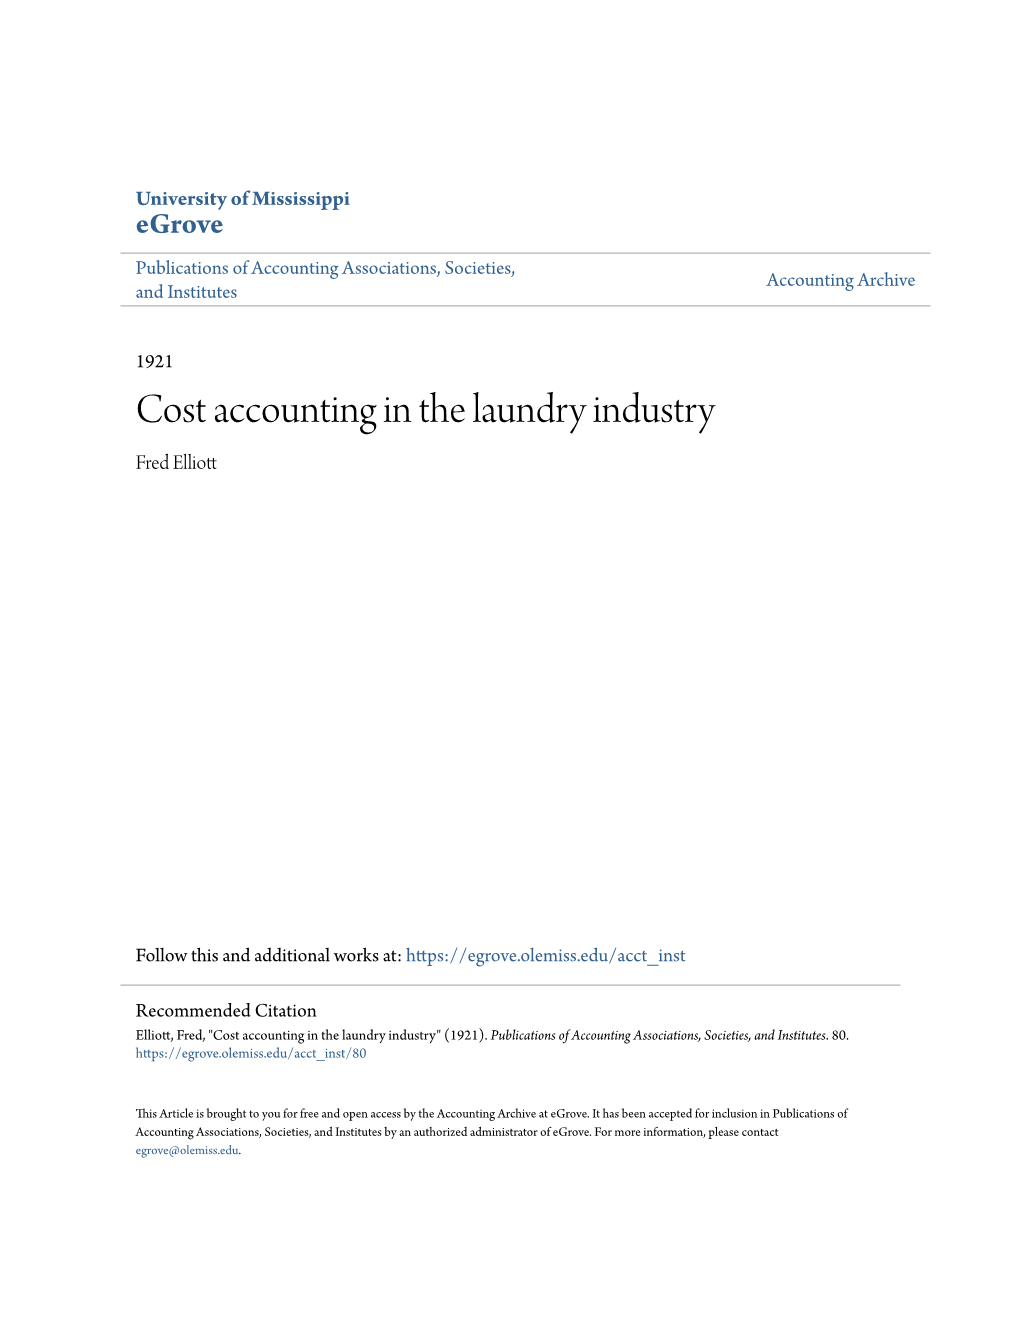 Cost Accounting in the Laundry Industry Fred Elliott